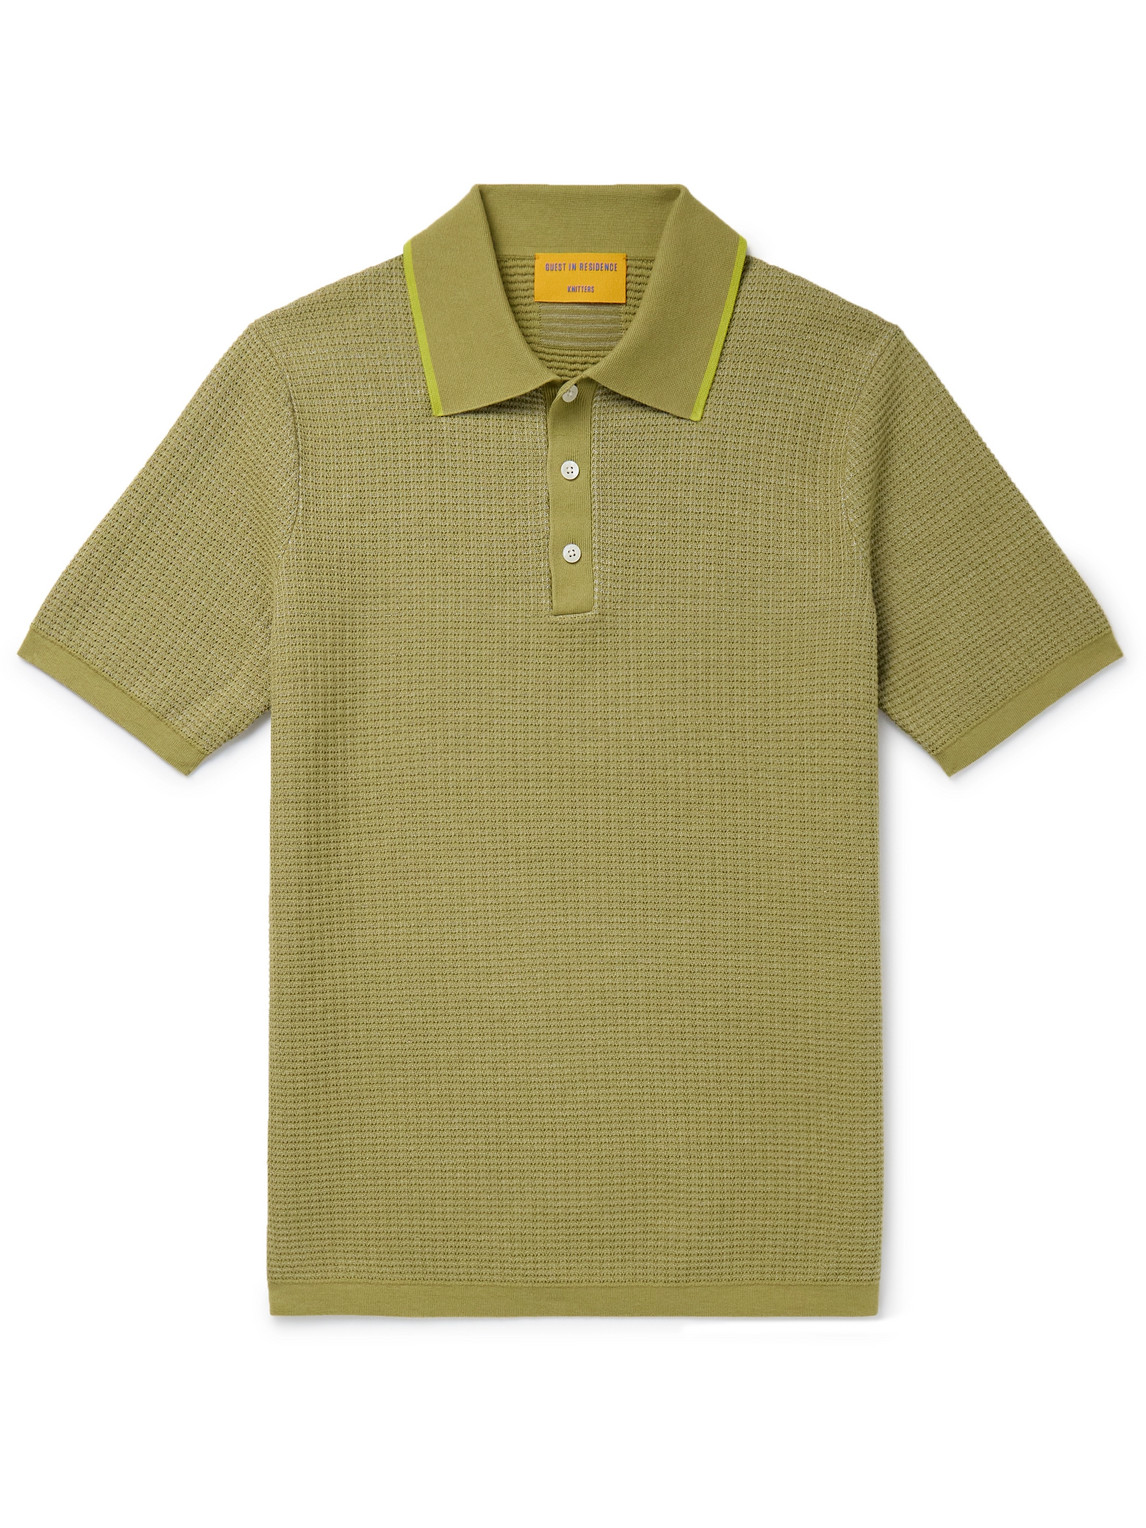 Guest In Residence - Striped Textured-Knit Cotton Polo Shirt - Men - Green - L von Guest In Residence